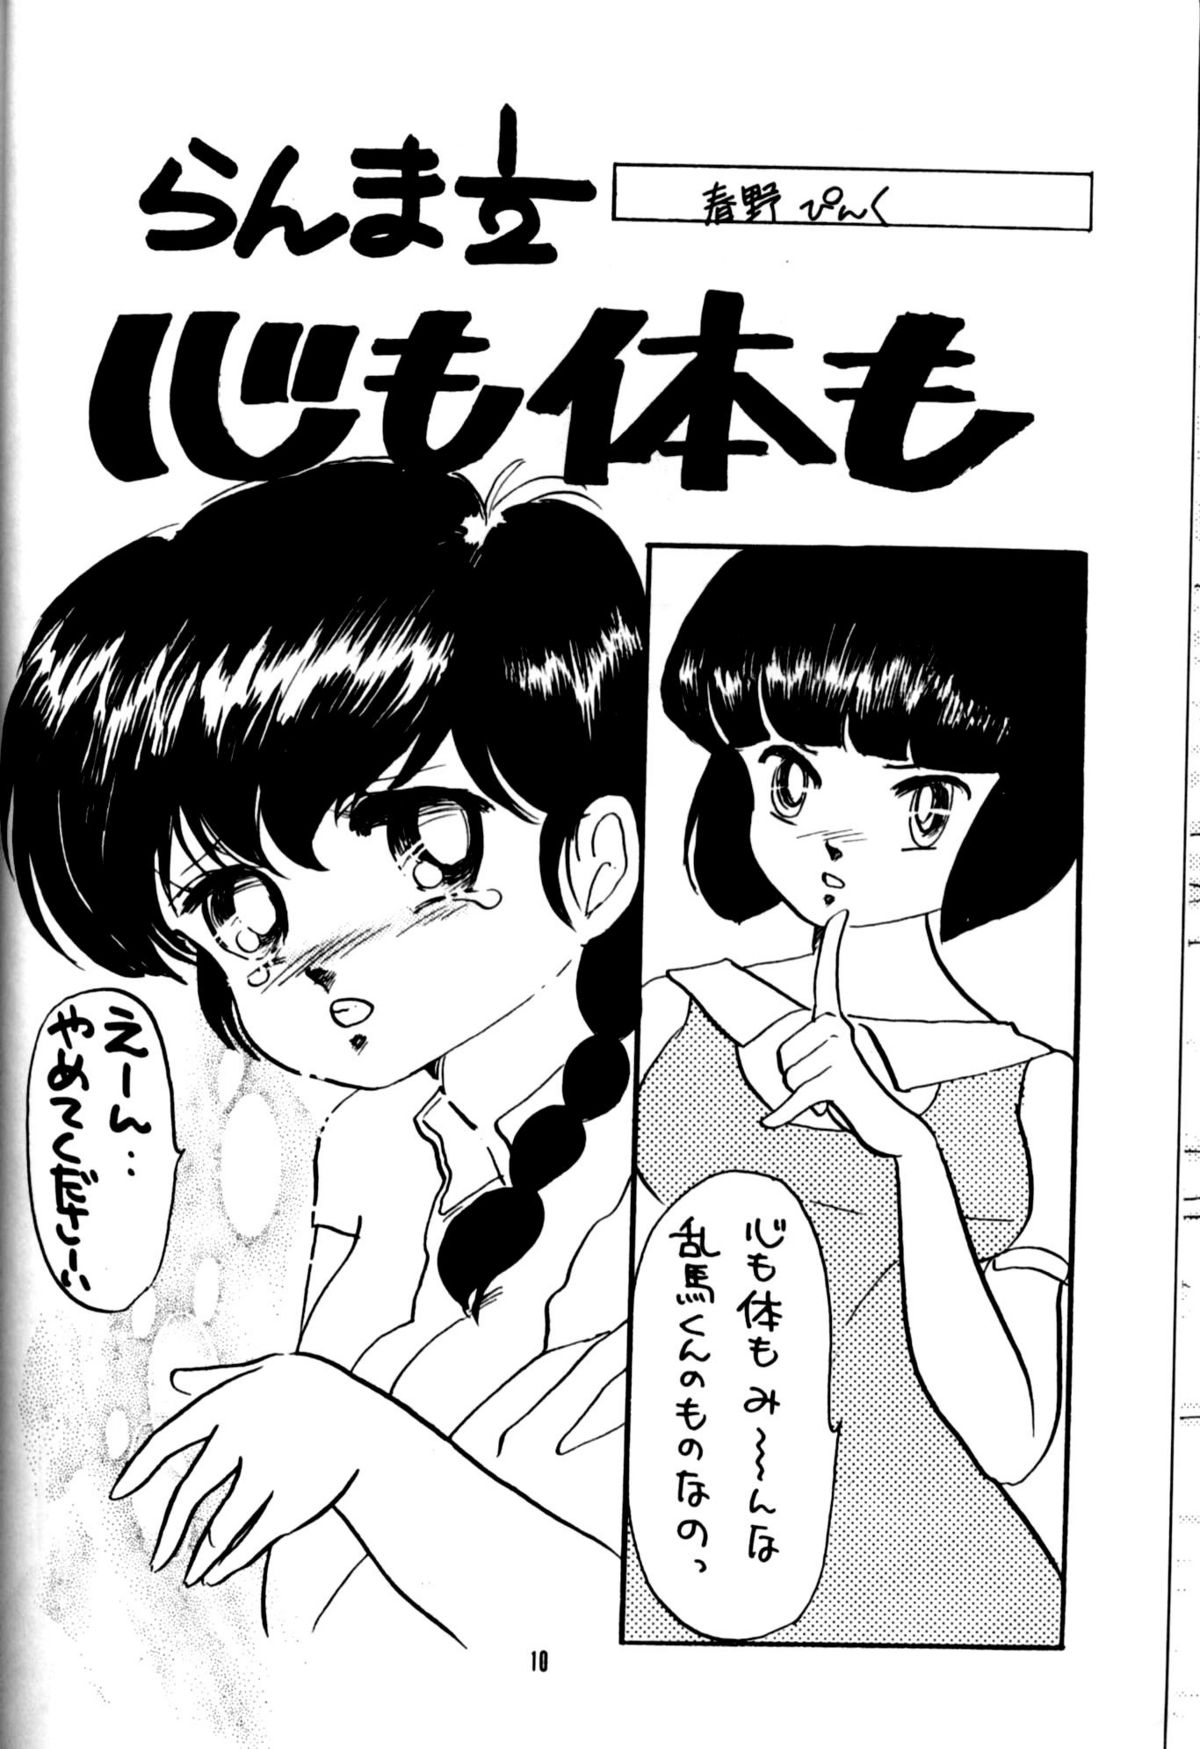 T You (Ranma 1/2) page 9 full